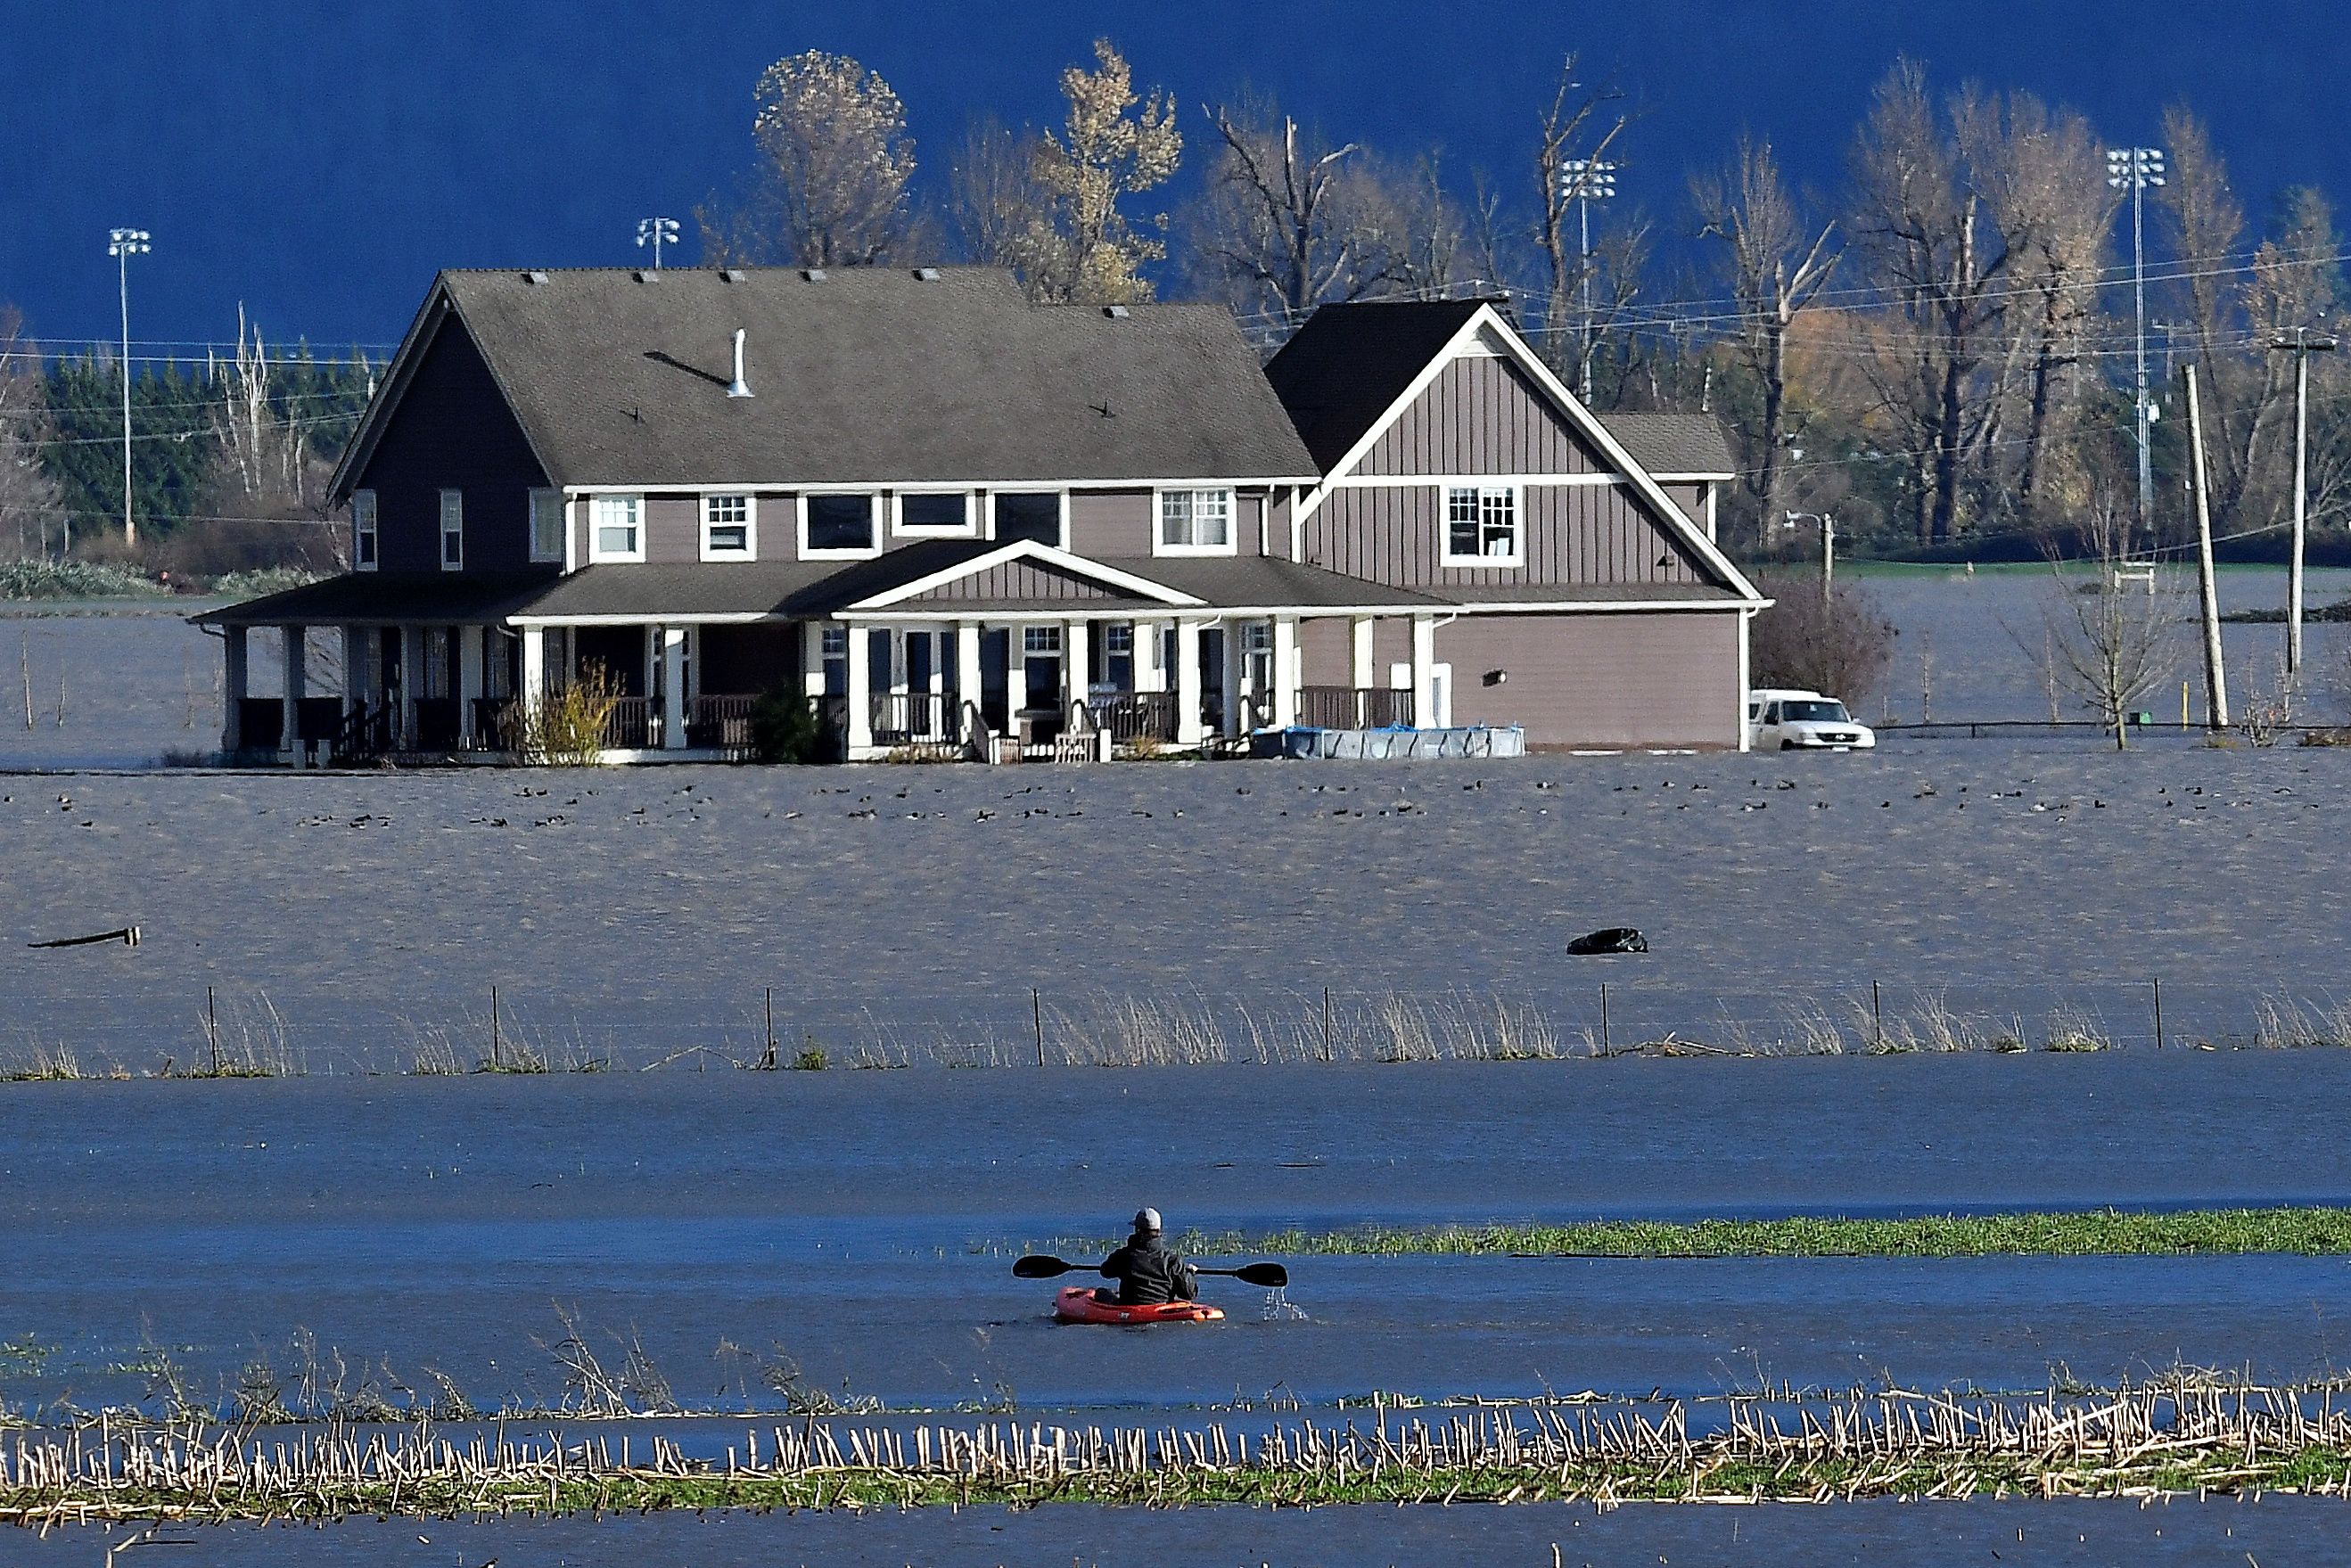 A paddler kayaks on a flooded stretch of farmland after rainstorms lashed the western Canadian province of British Columbia, triggering landslides and floods and shutting highways, in Abbotsford, British Columbia, Canada November 16, 2021.  REUTERS/Jennifer Gauthier